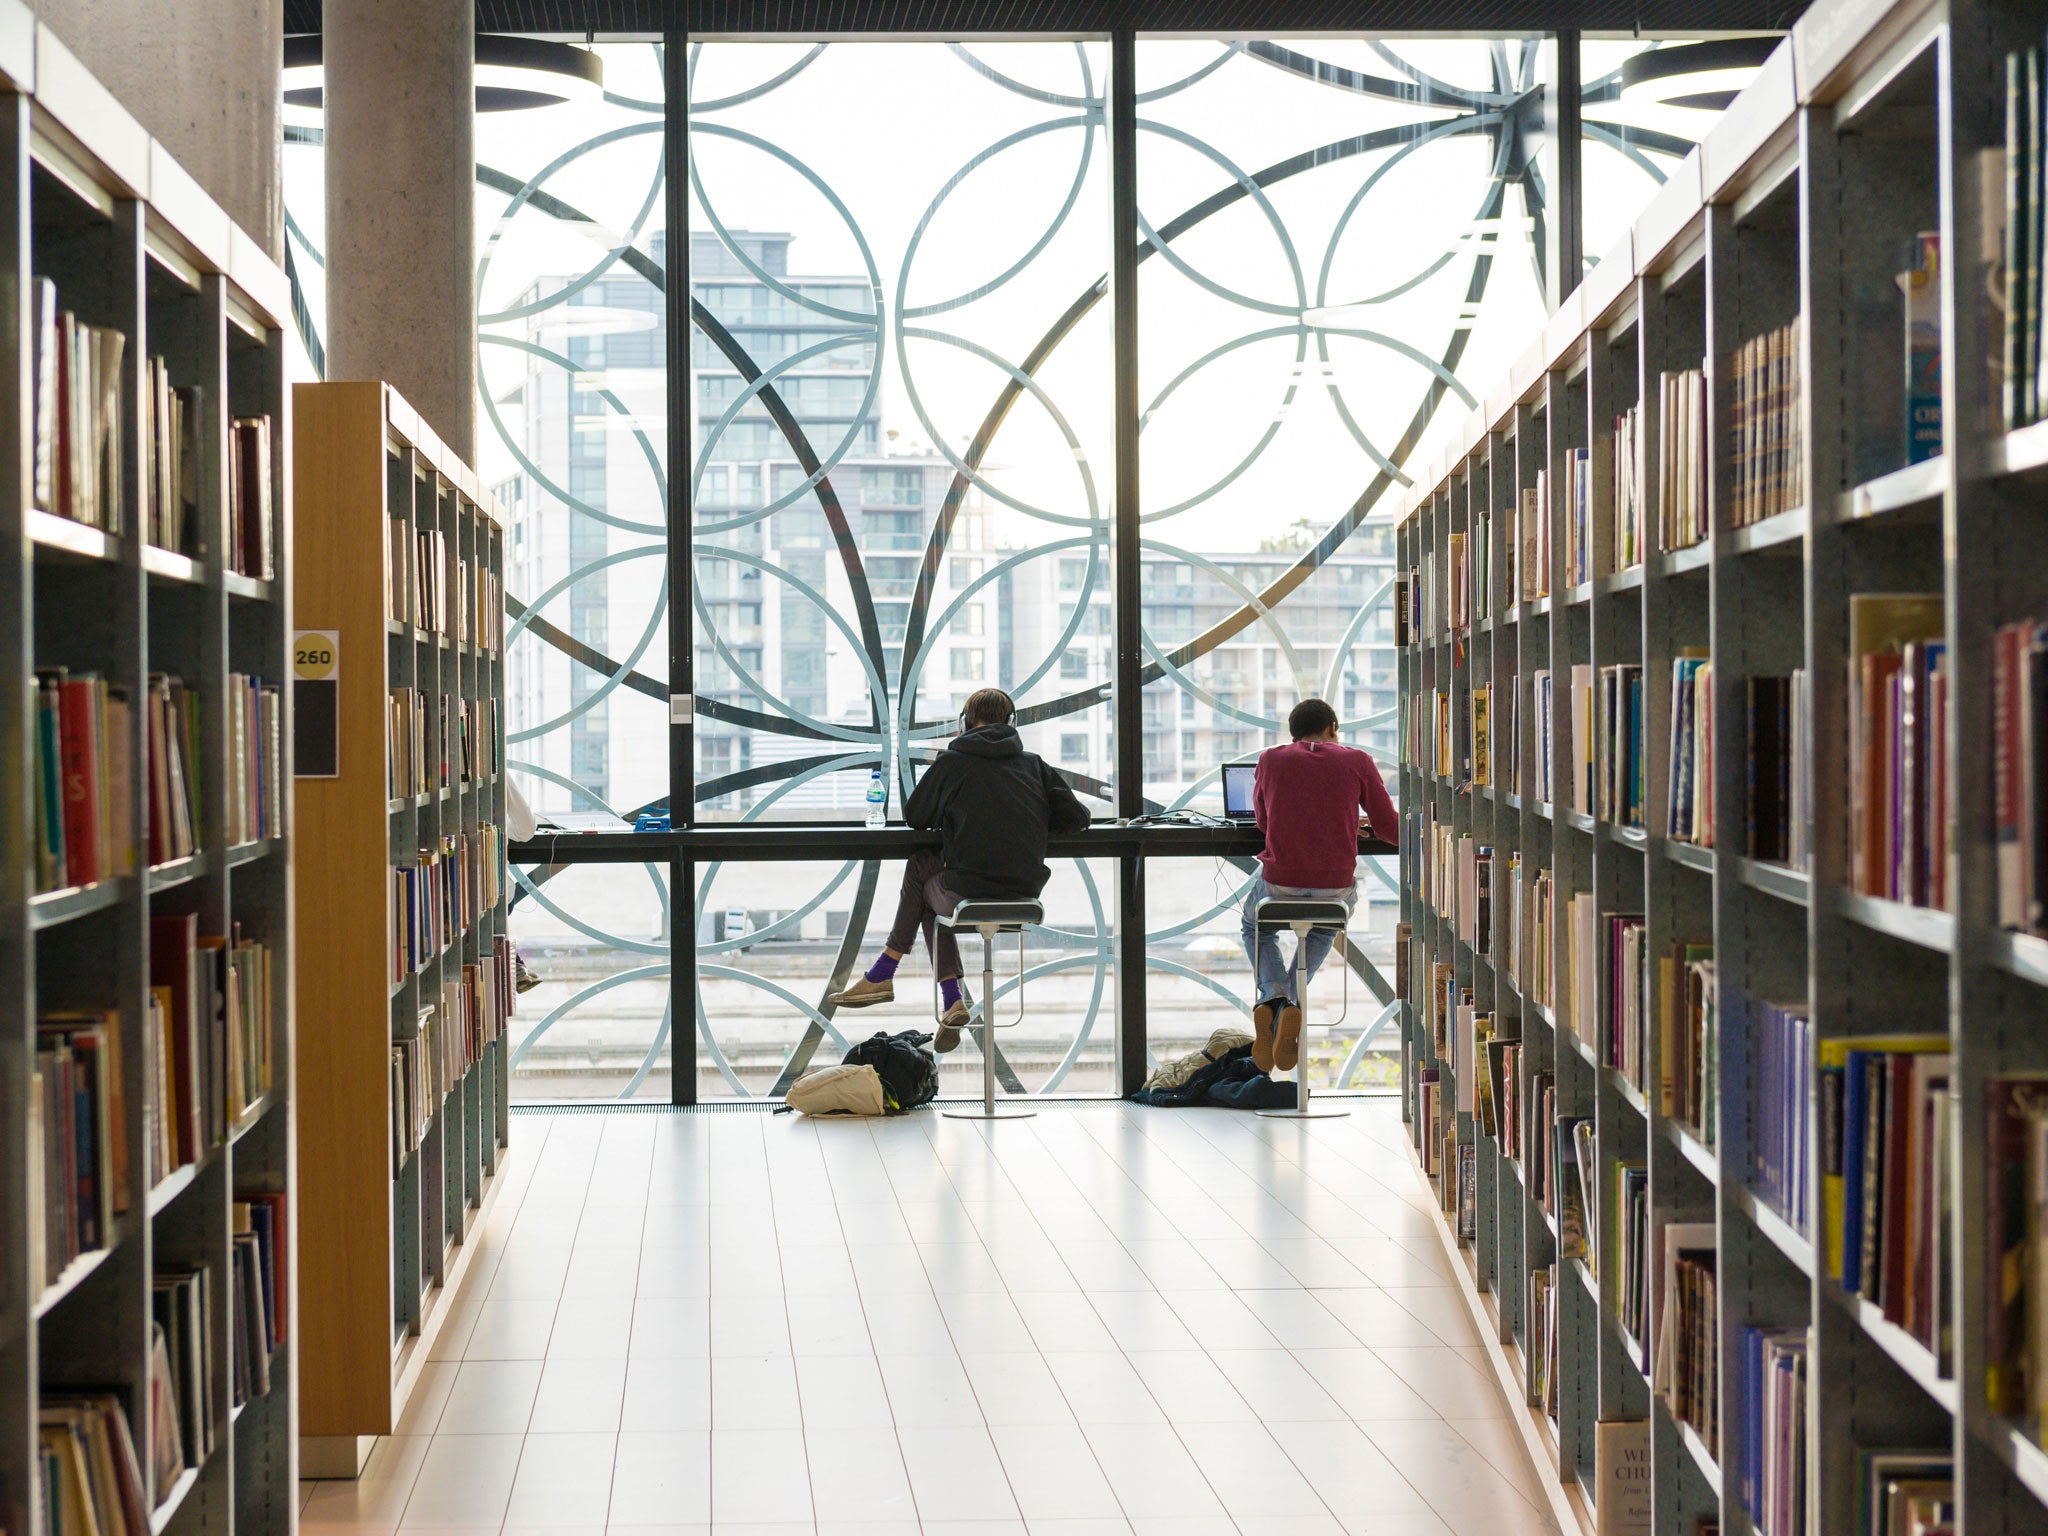 Shelf-life: Birmingham Library, a new addition to a dying tradition of public libraries in the United Kingdom